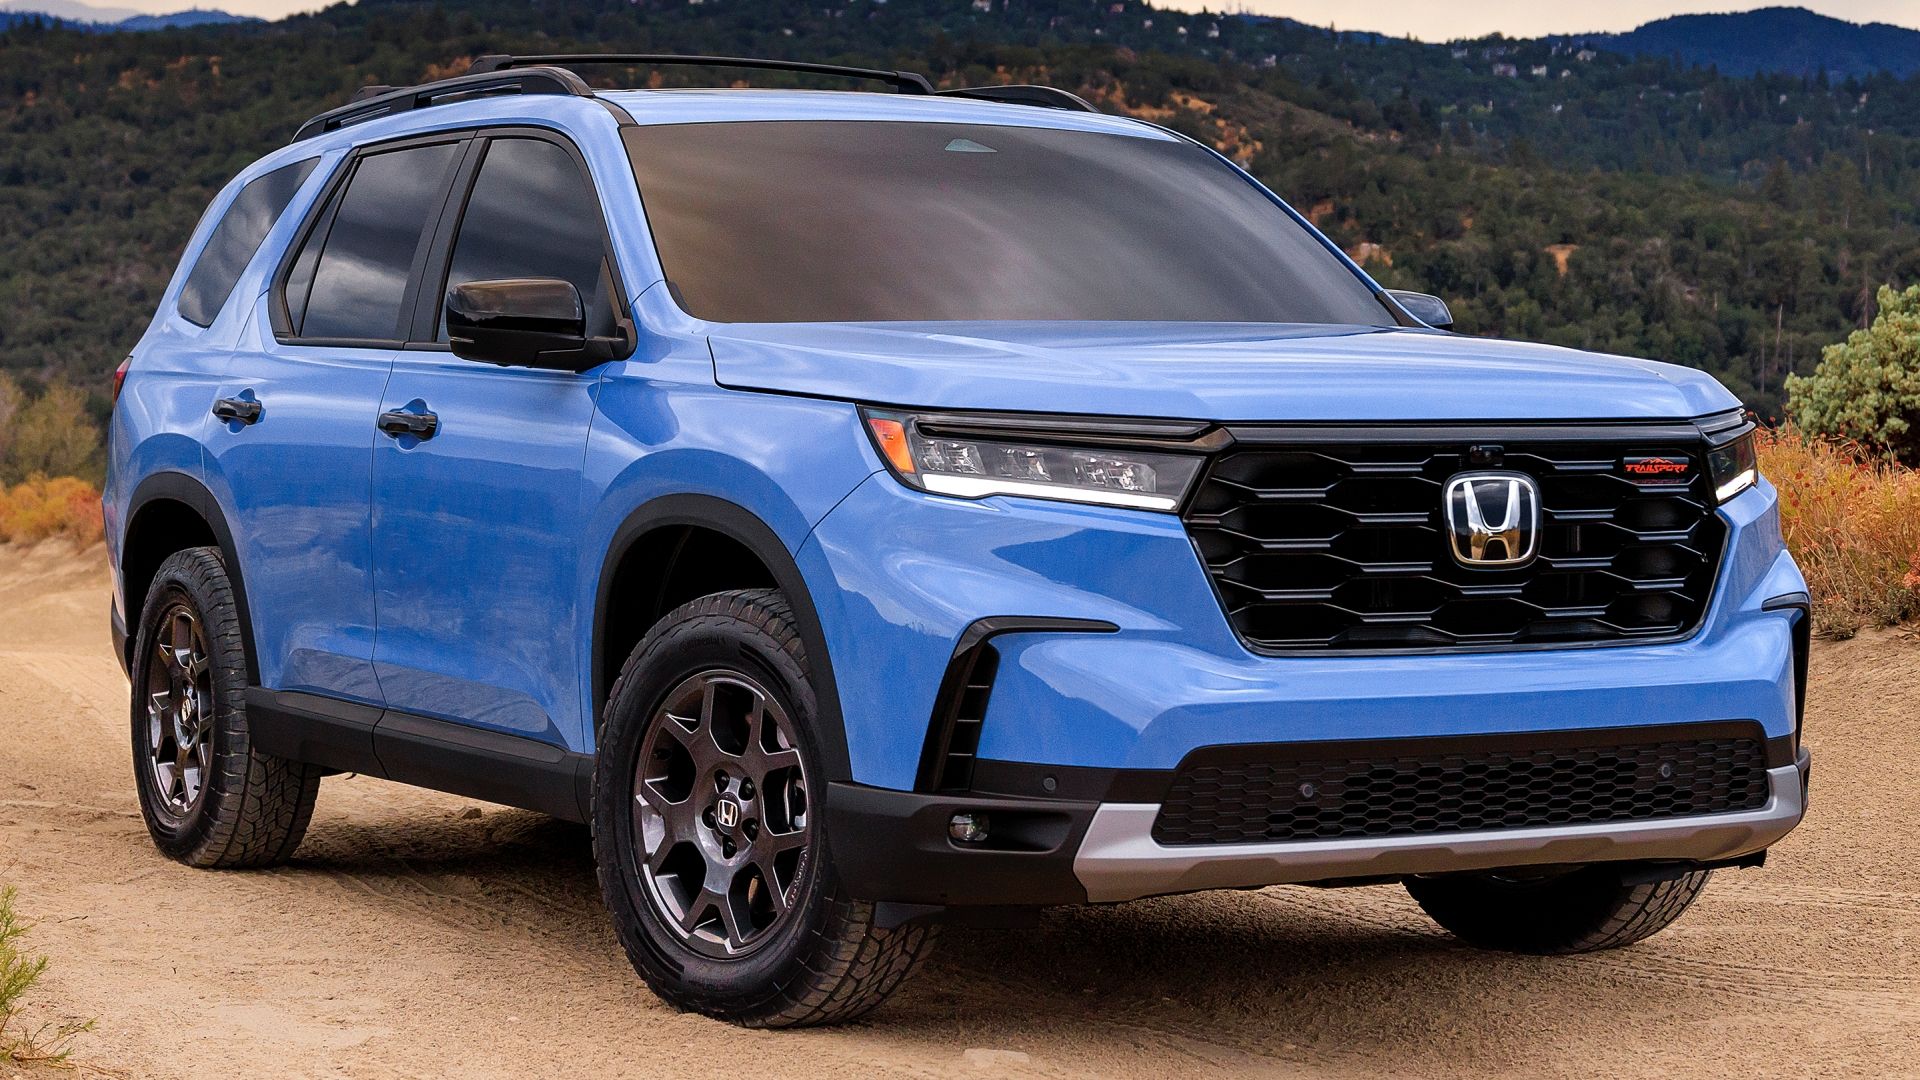 2023 Honda Pilot TrailSport in Diffused Sky Blue Pearl color on an off-road trail